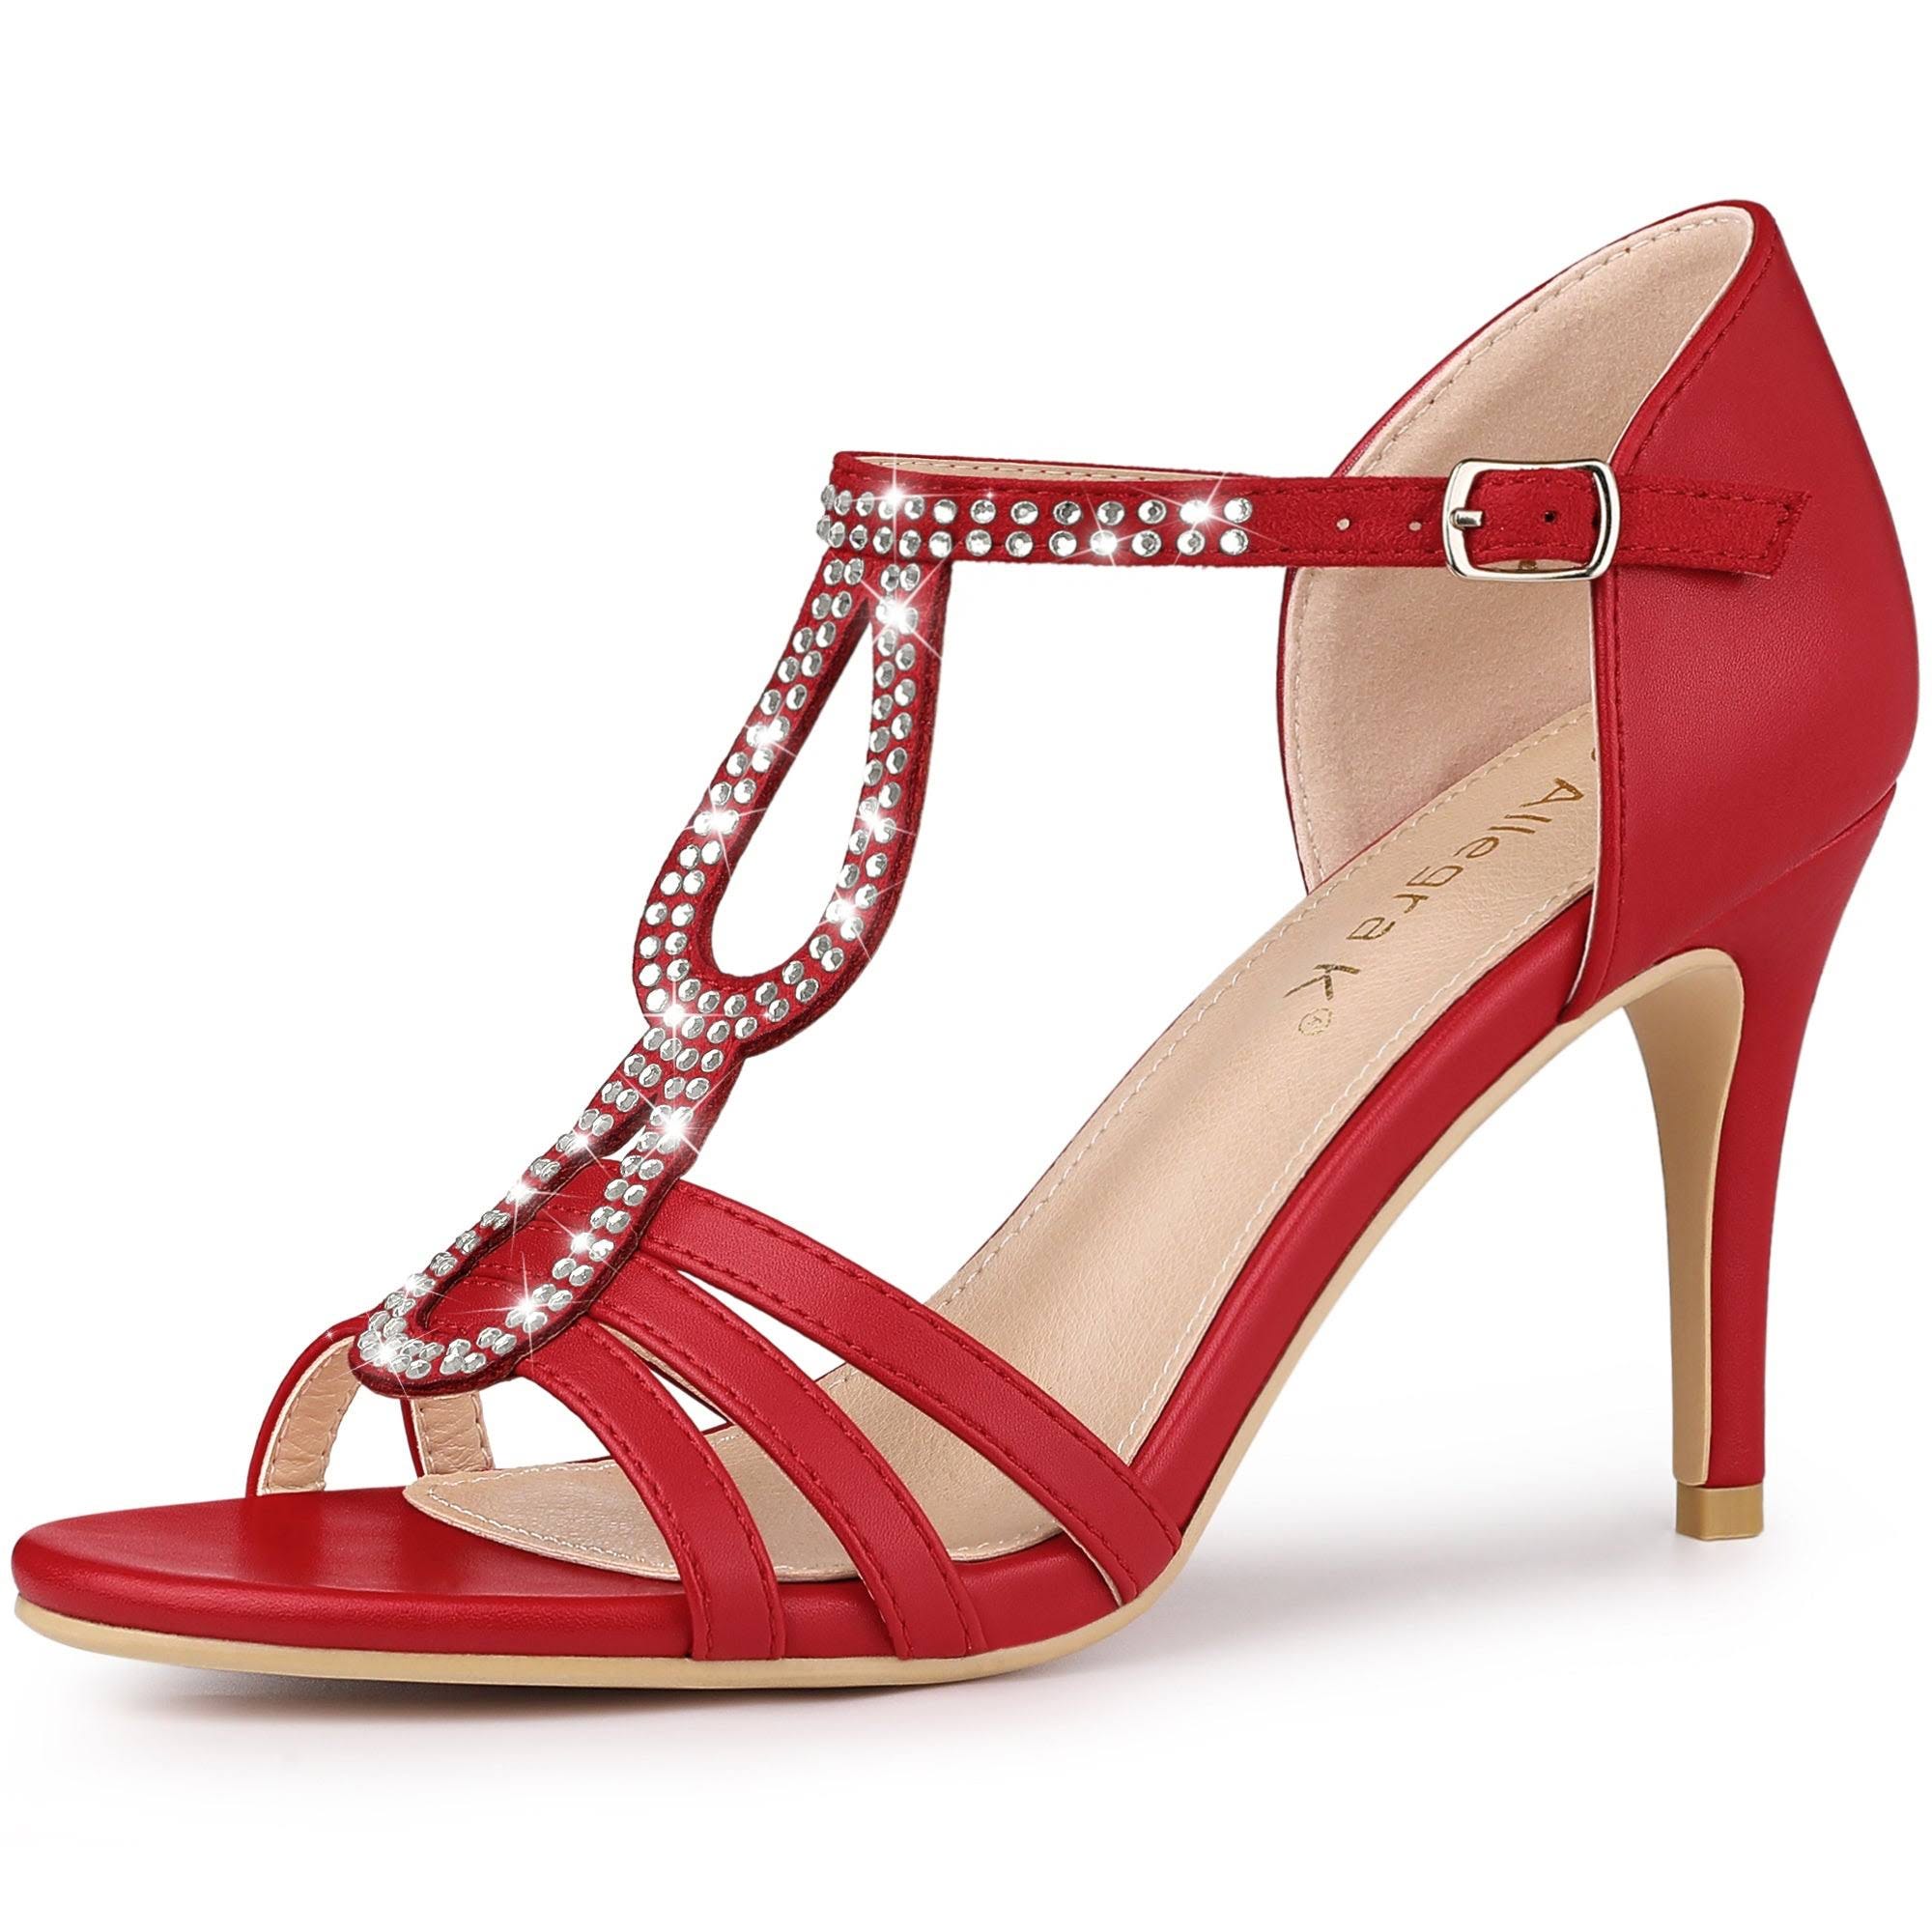 Classic Red Rhinestone Ankle Strap Stiletto Heels Sandals | Image